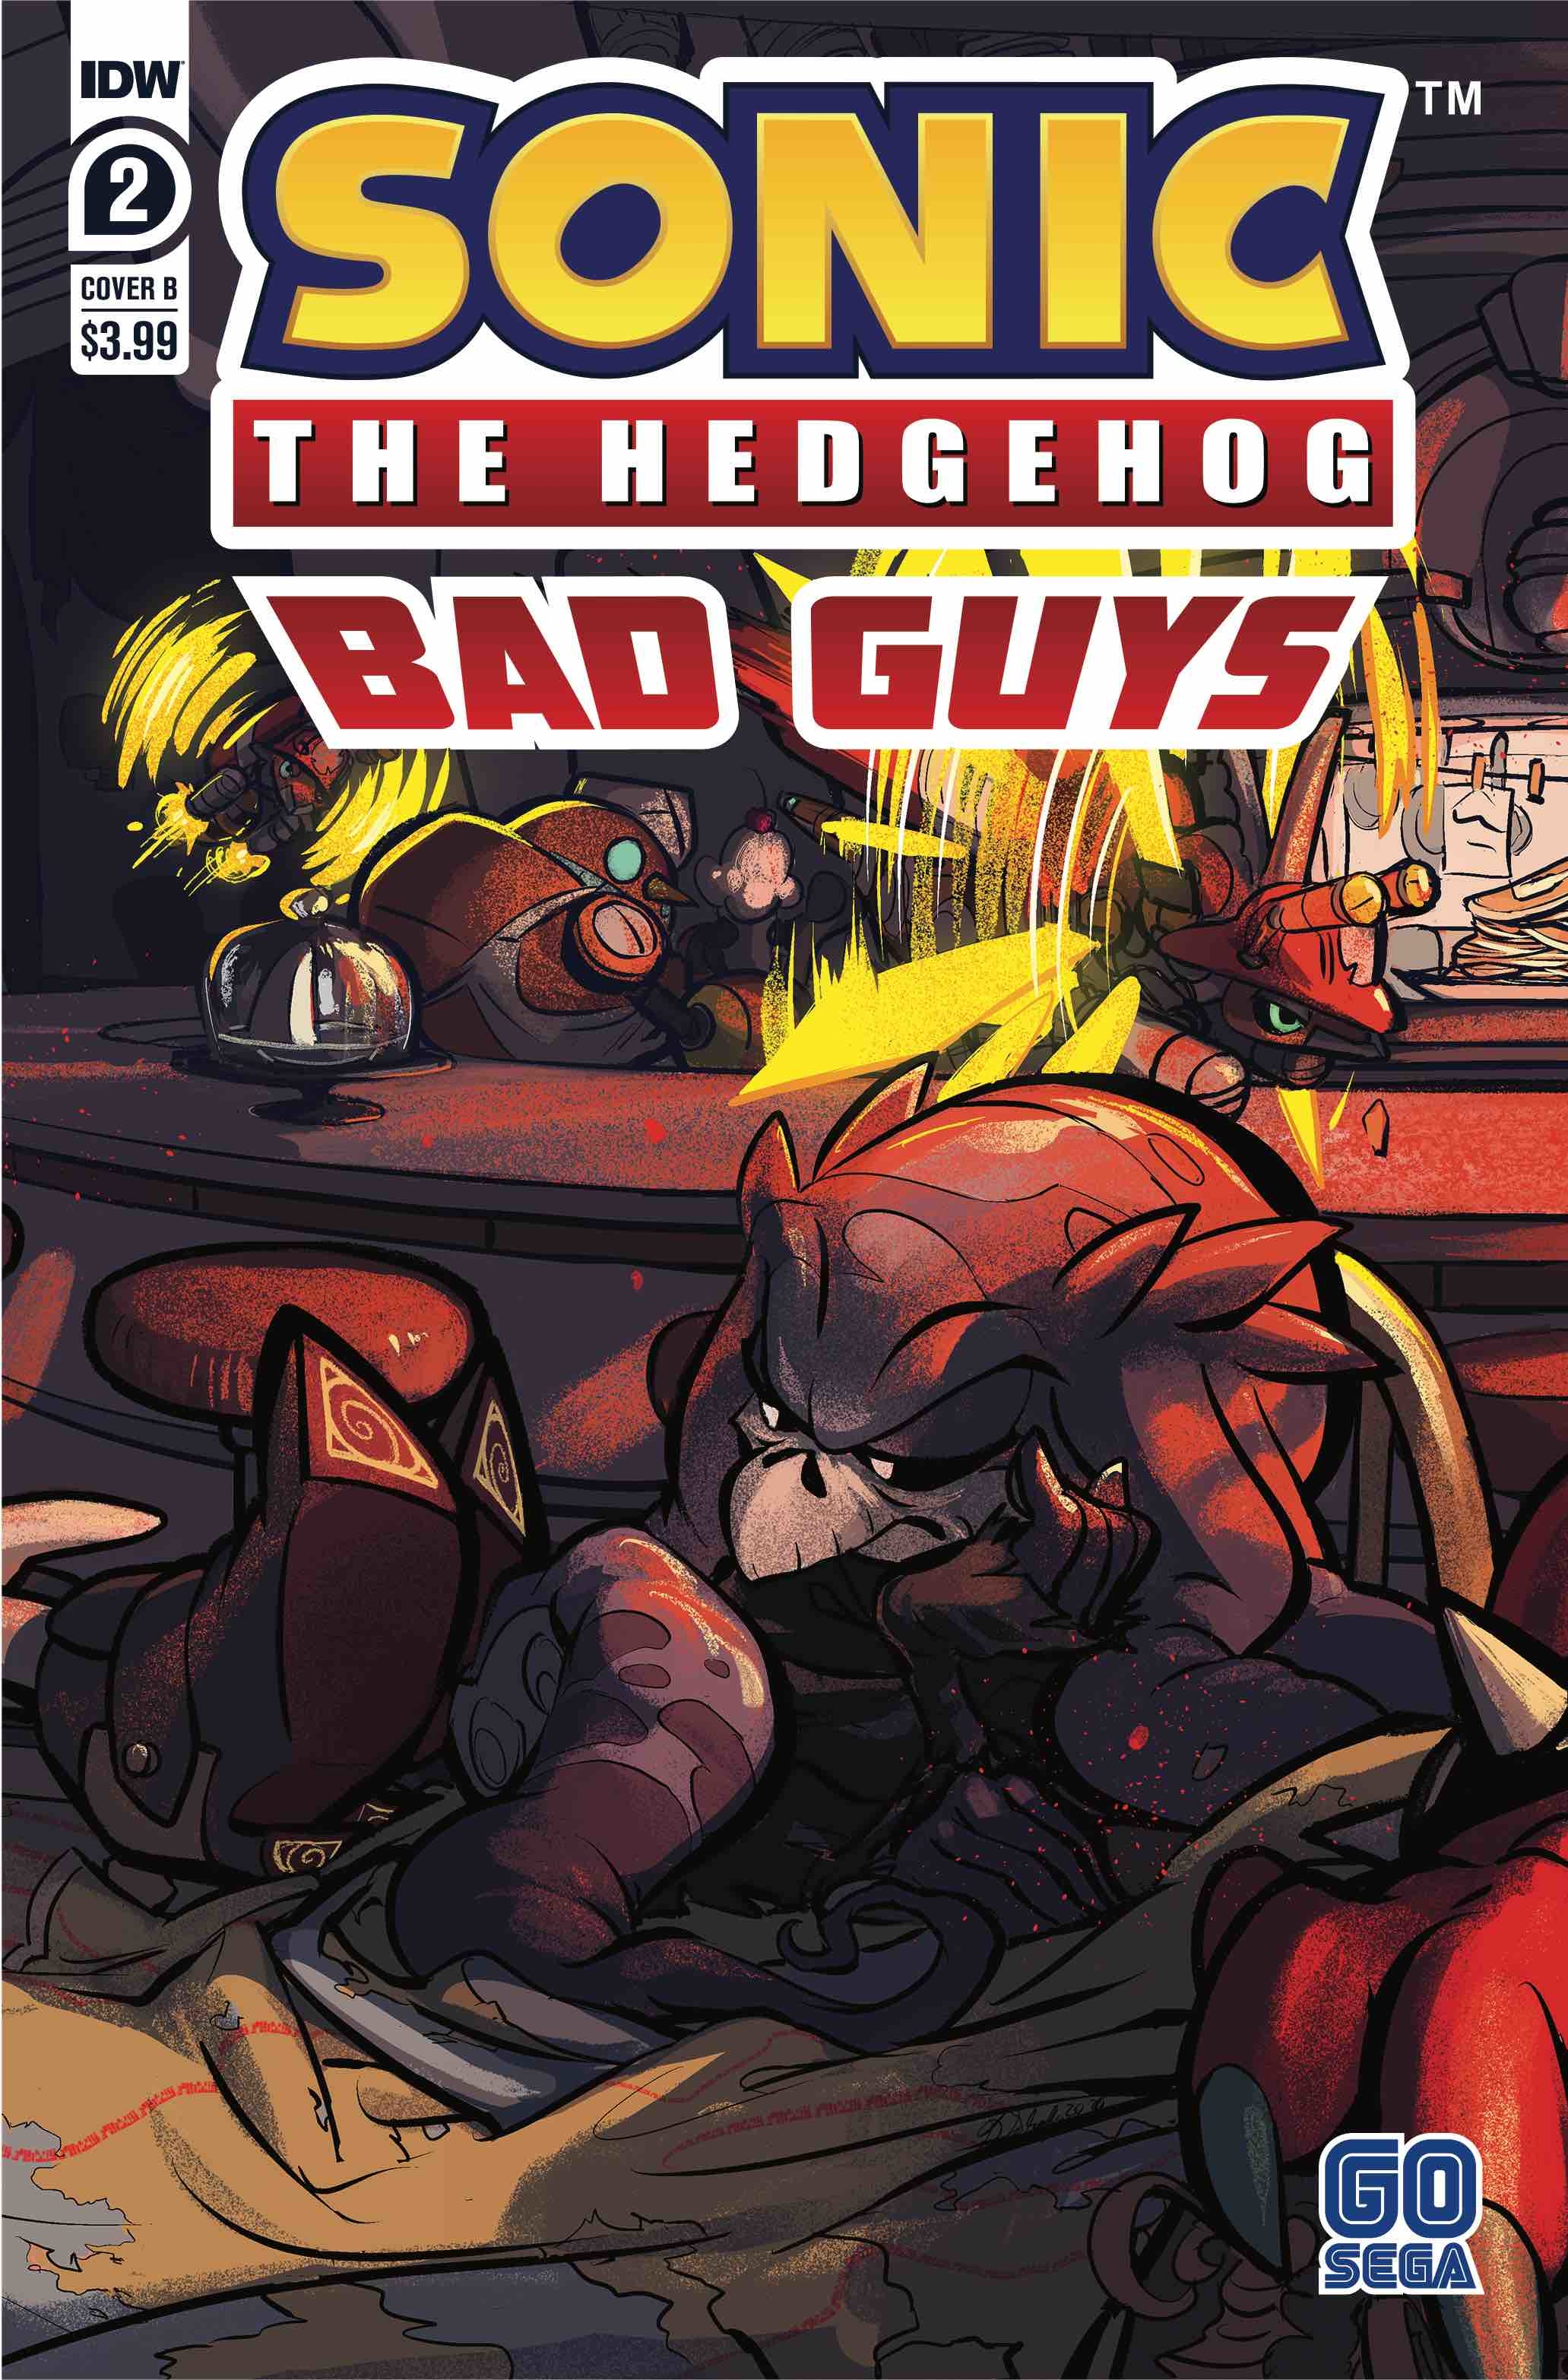 Sonic the Hedgehog Bad Guys #2 Cover B Skelly (Of 4)